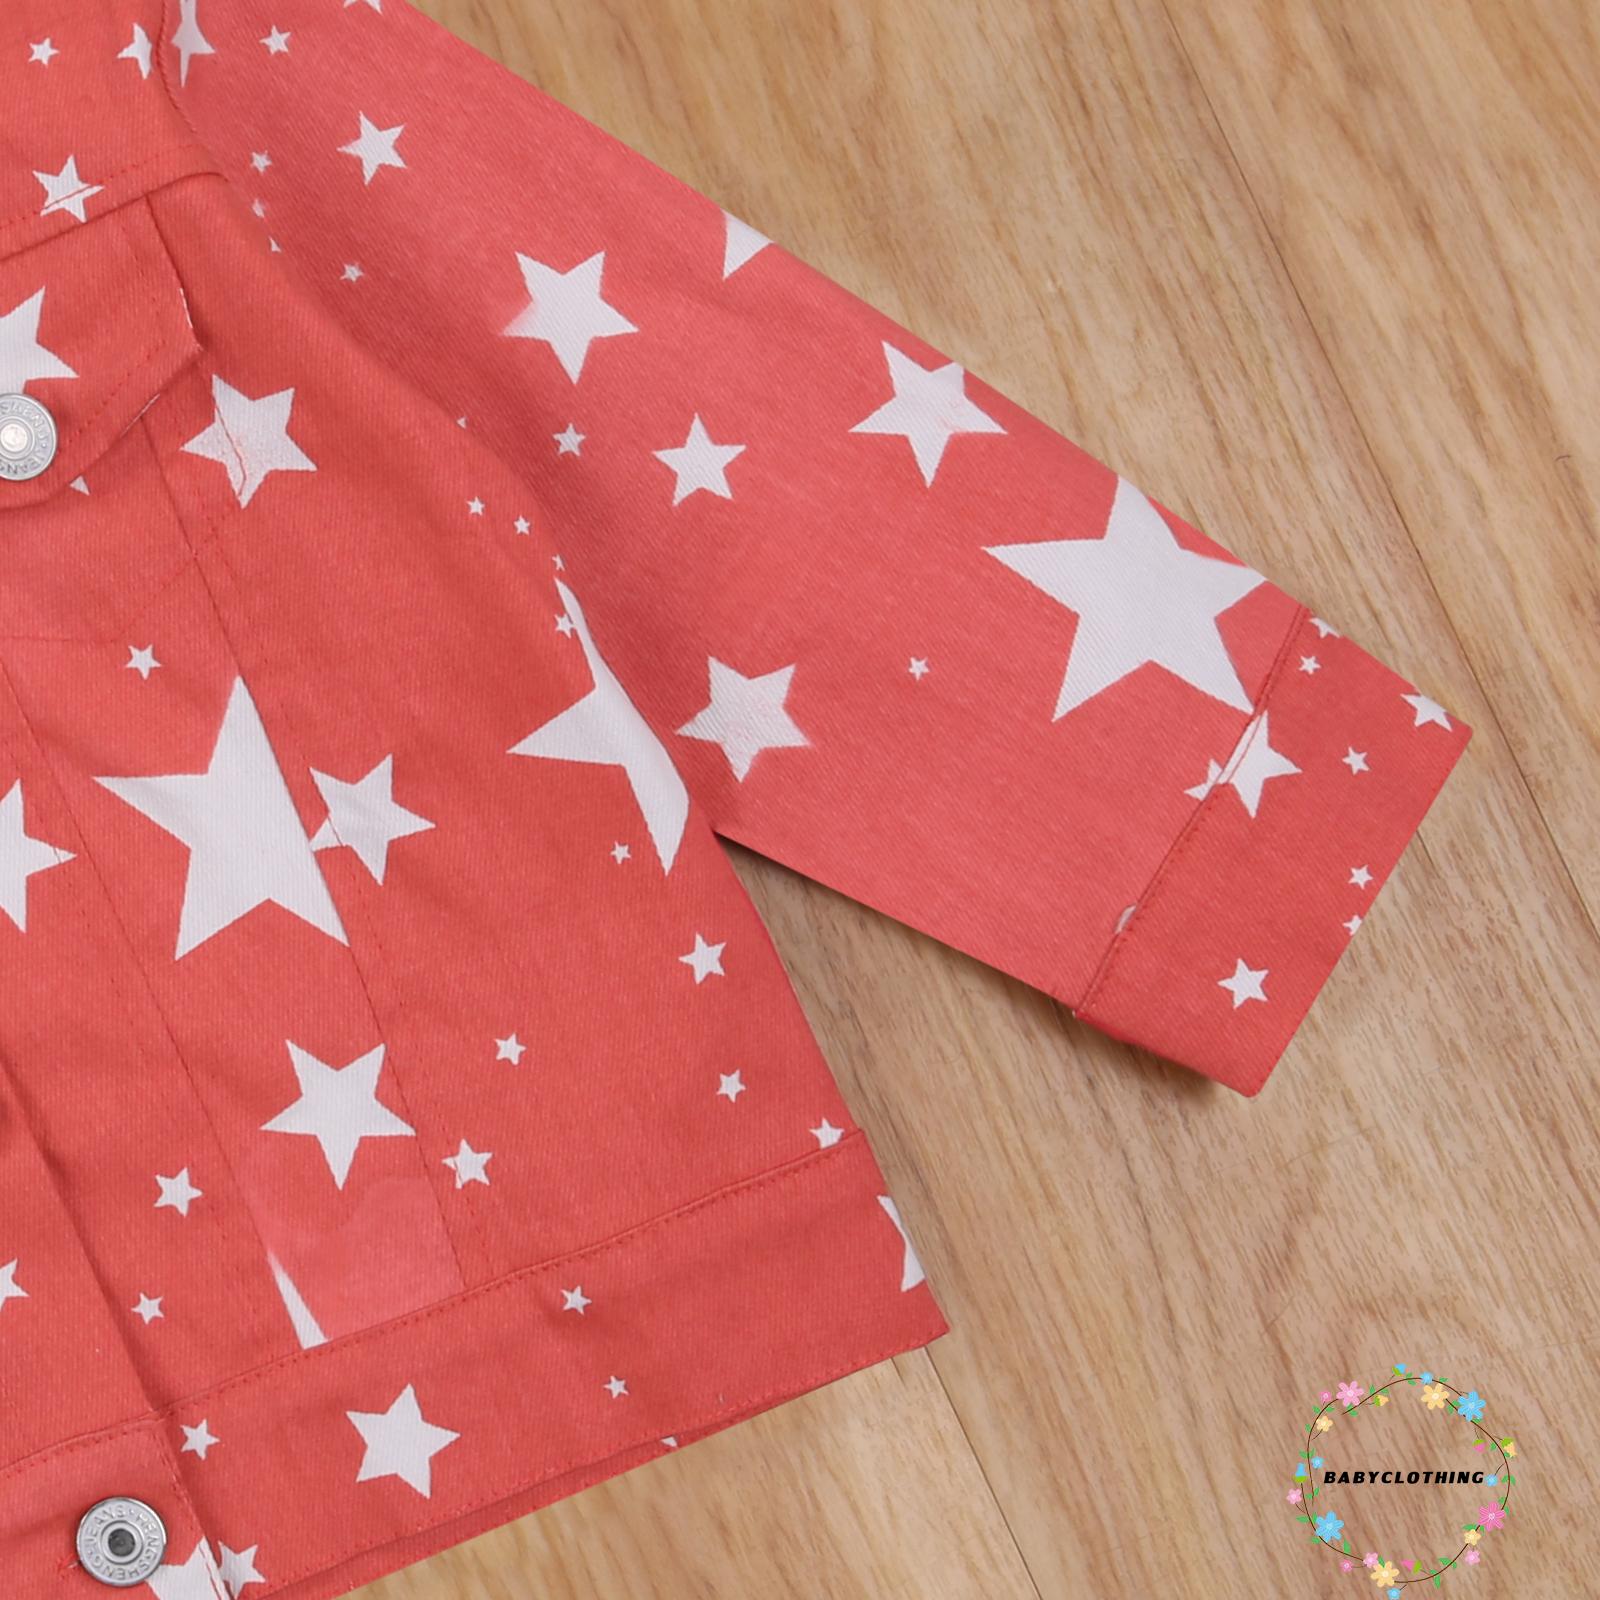 BBCQ-Children´s Jacket, Girl´s Lapel Long Sleeve Top Star Printed Pattern Autumn Coat for Boys